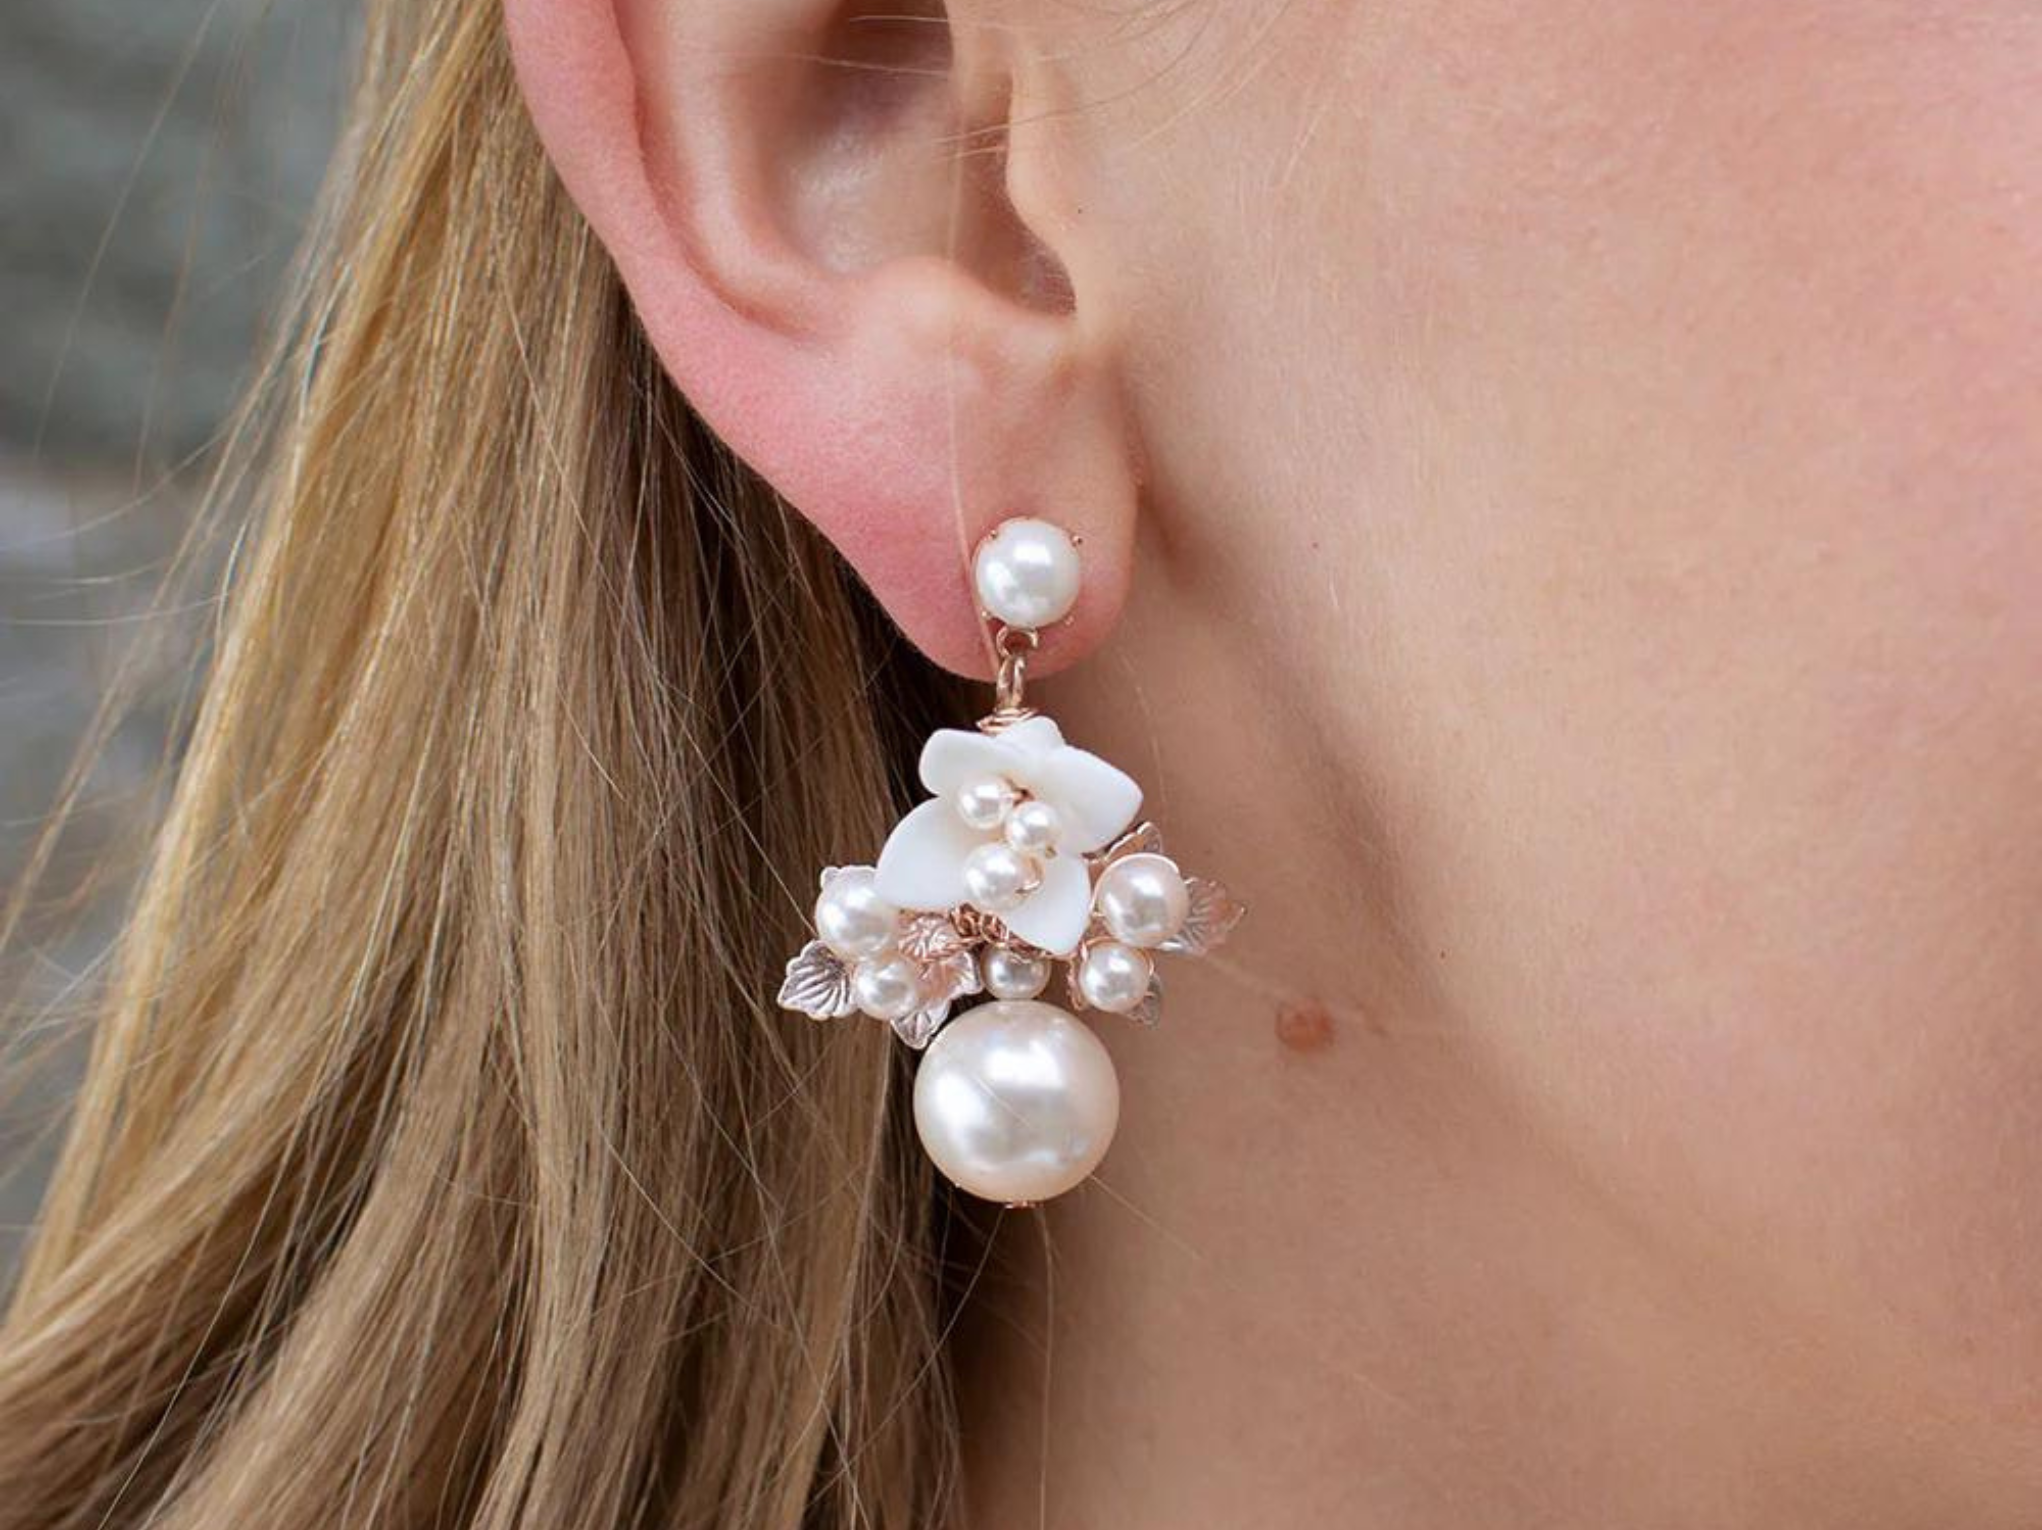 18ct White Gold Diamond & Pearl Cluster Earrings | Aspinal